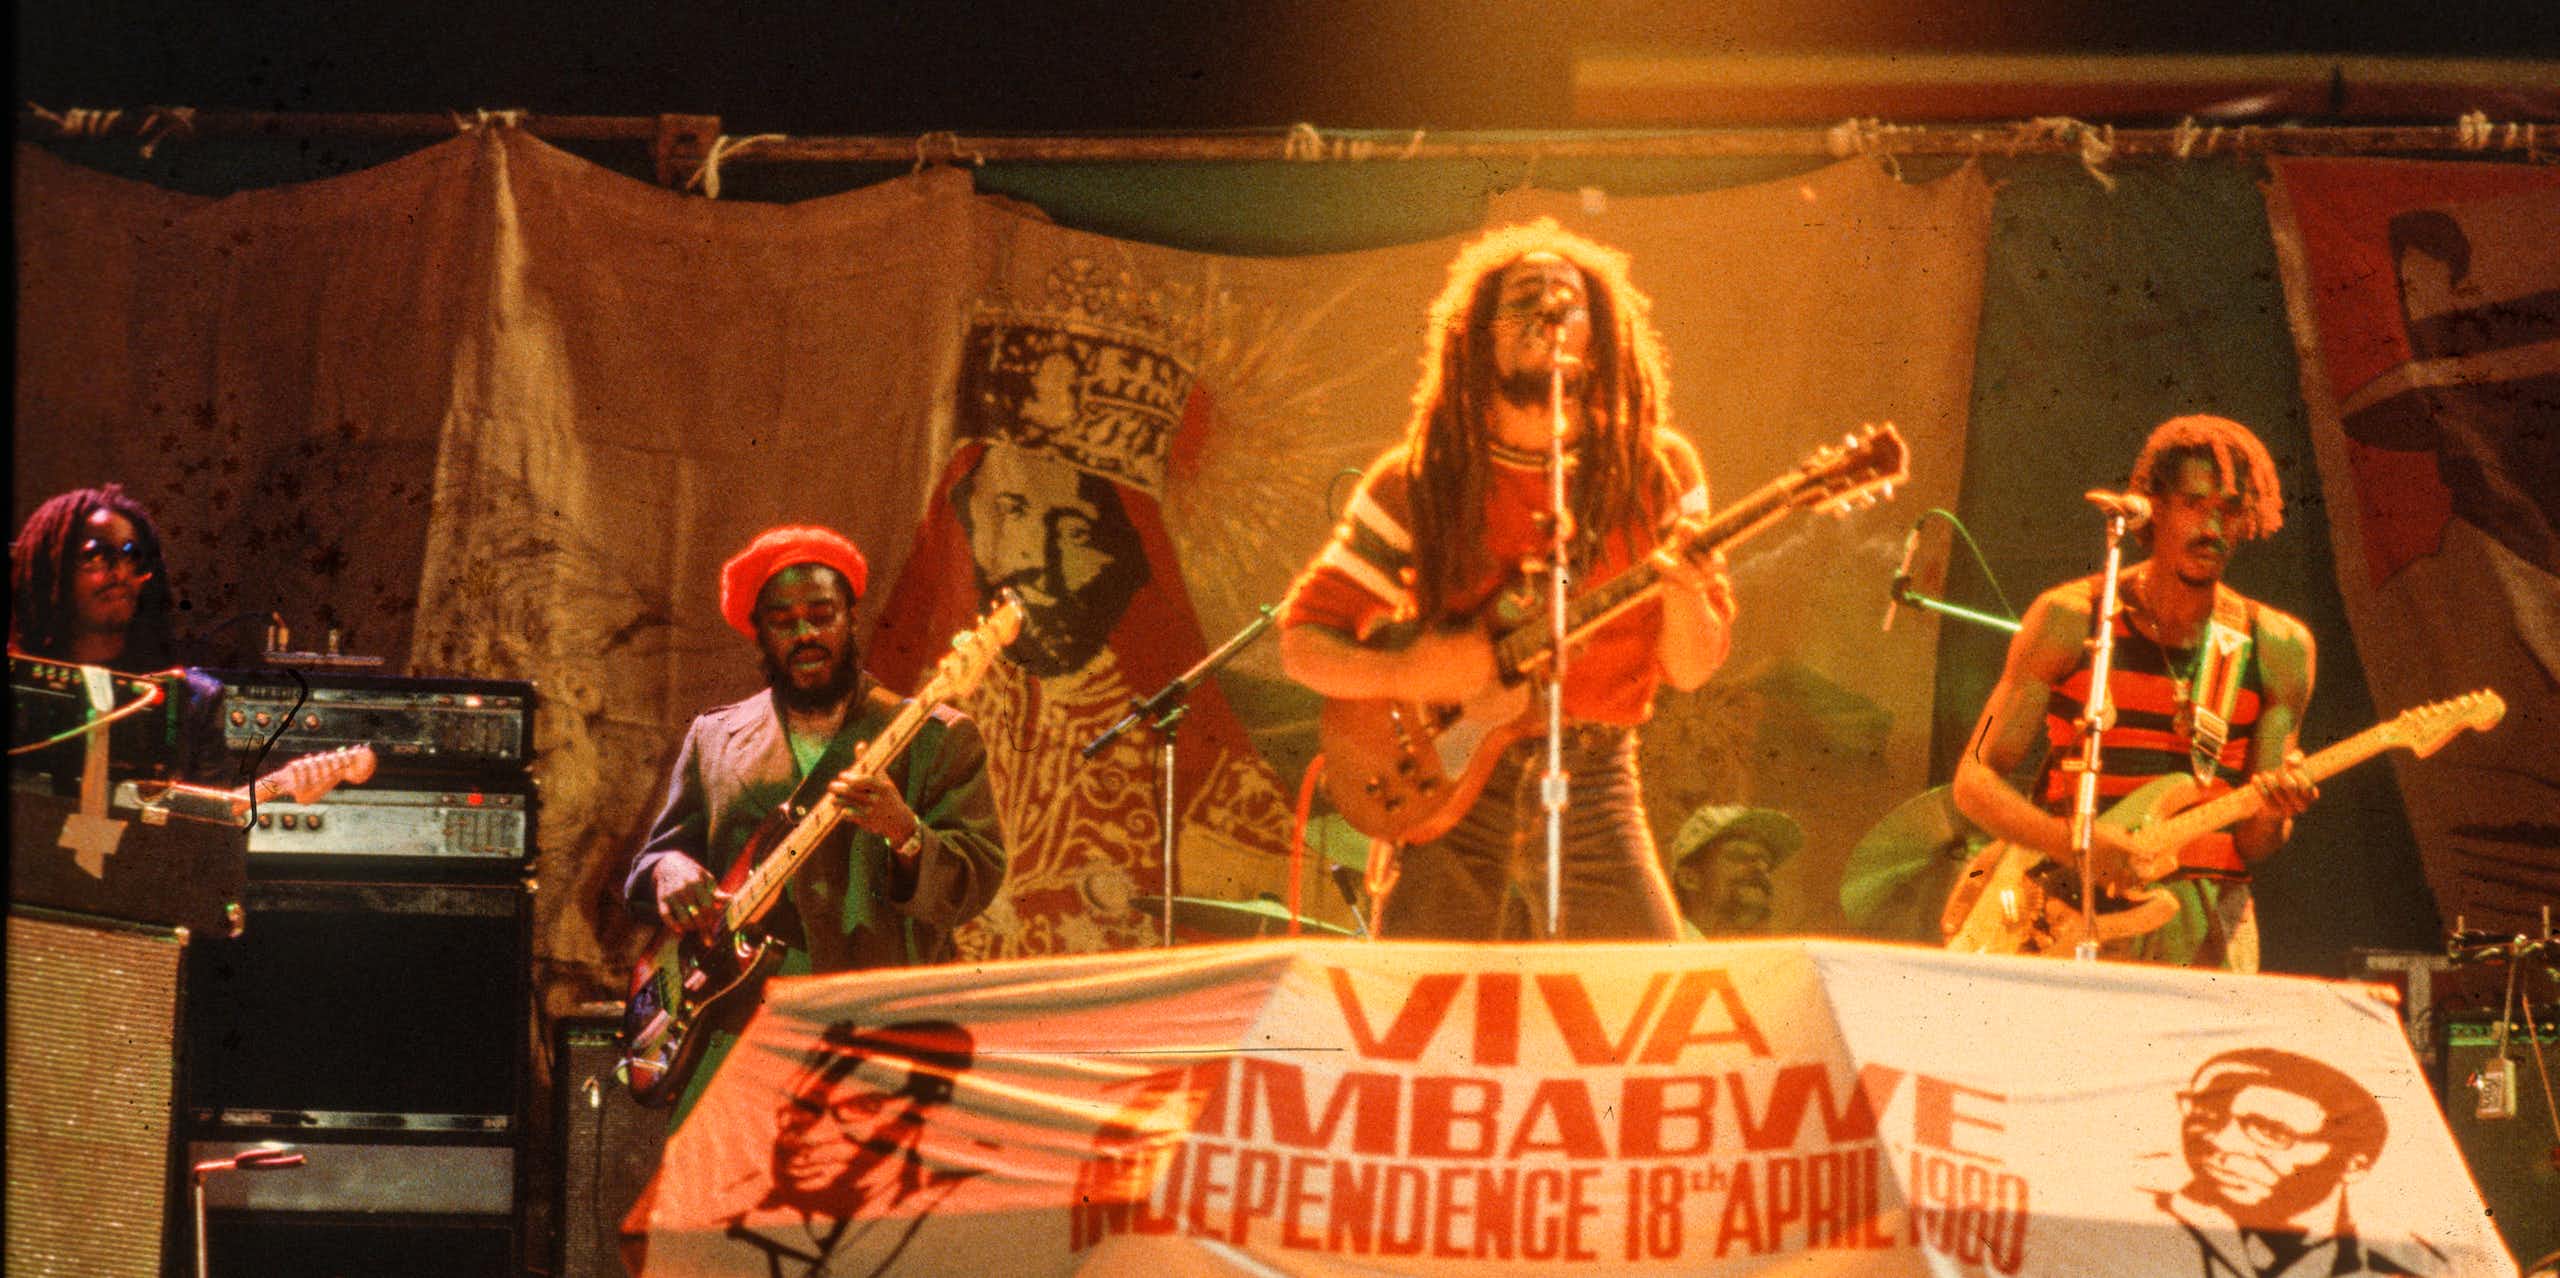 Dreadlocked man sings and plays guitar in front of sign reading 'Viva Zimbabwe.'